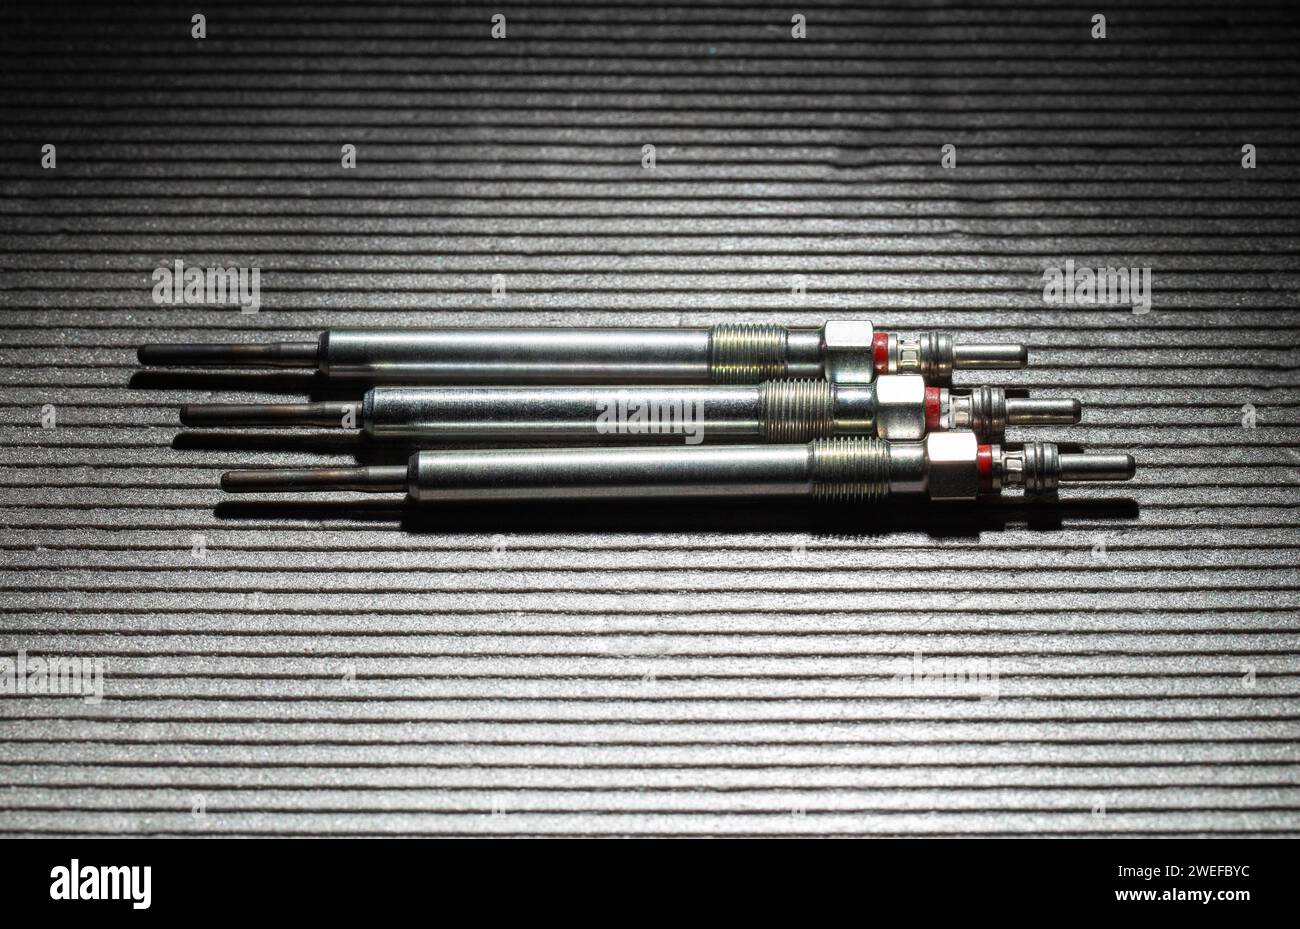 Modern rod ceramic glow plugs for easier starting of a diesel engine in cold weather on a gray background. Automotive spare part, heating element, eng Stock Photo